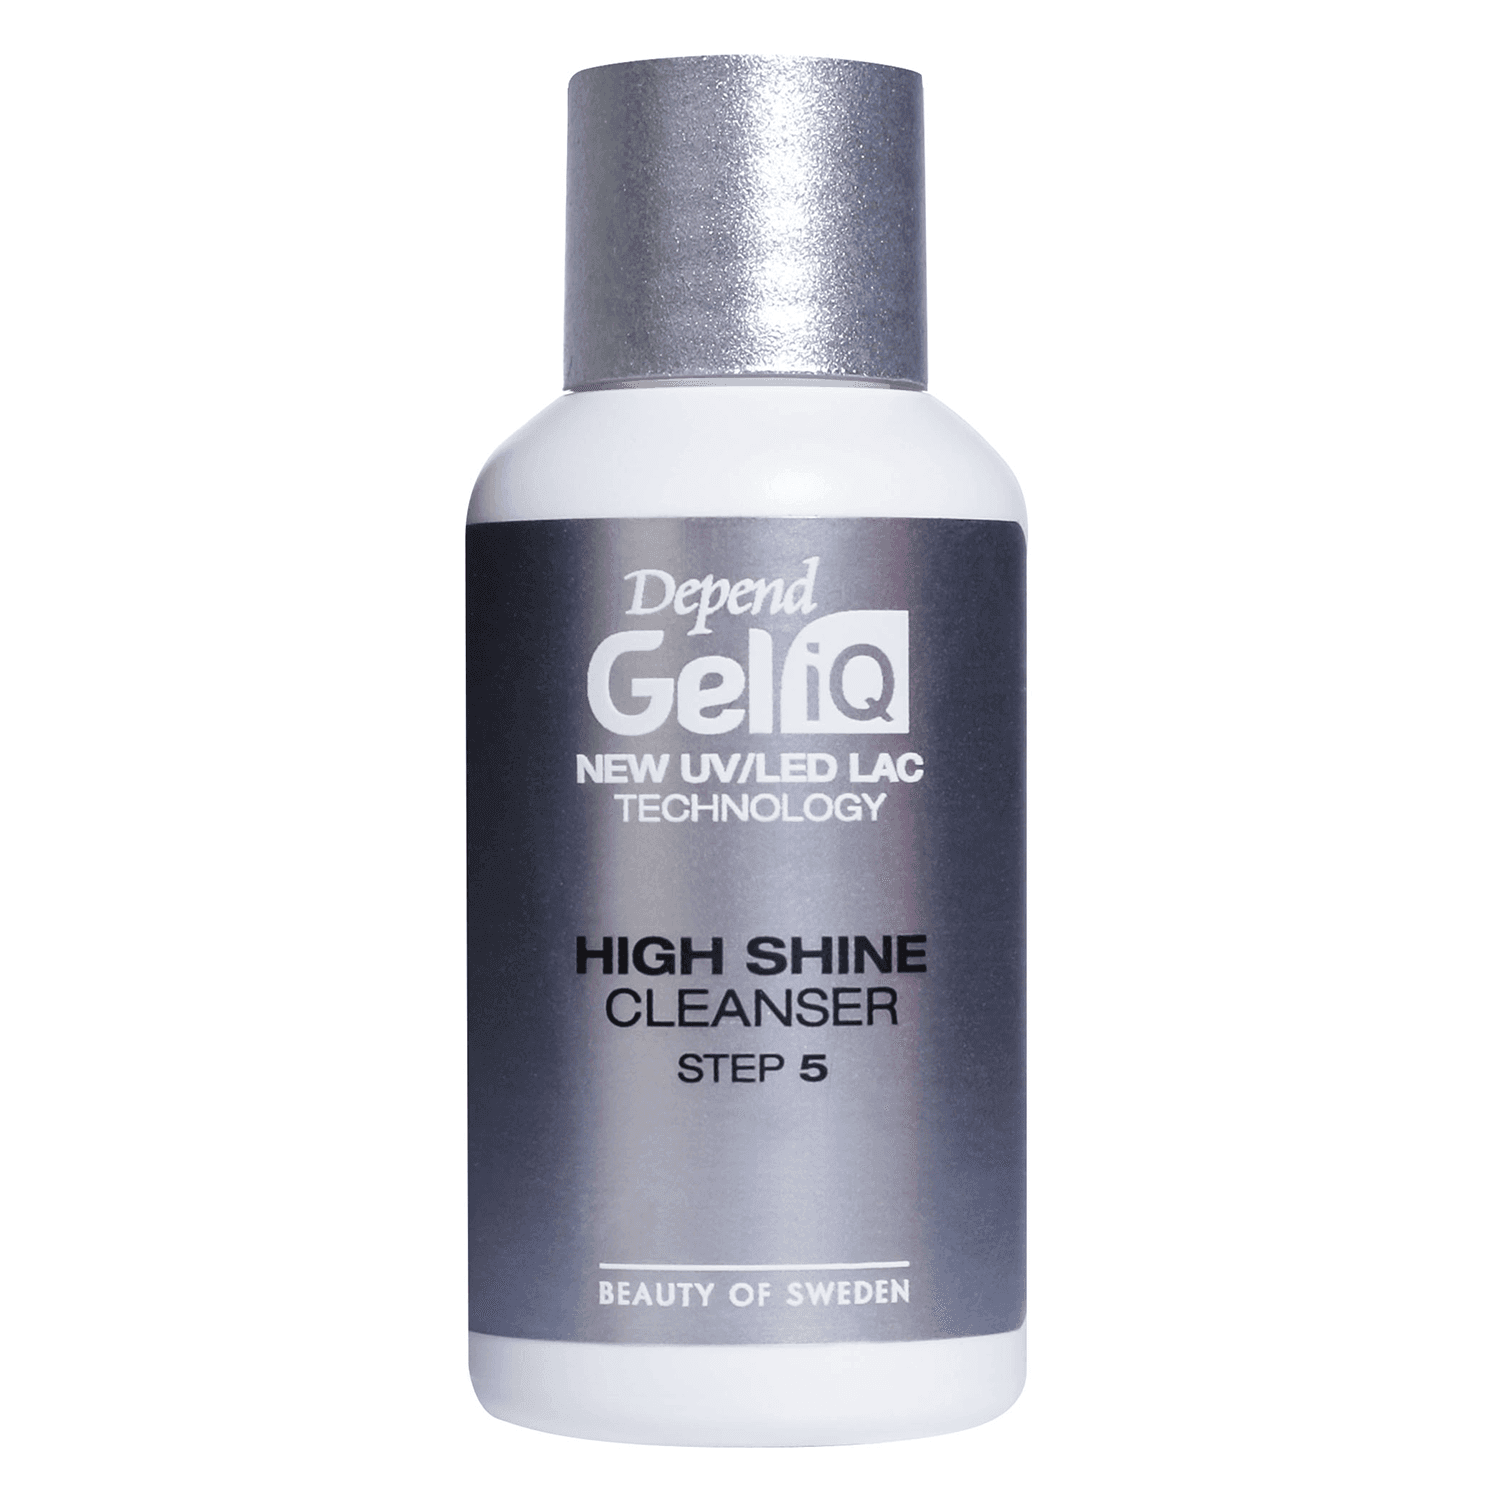 Gel iQ Cleanser & Remover - High Shine Cleanser Step 5